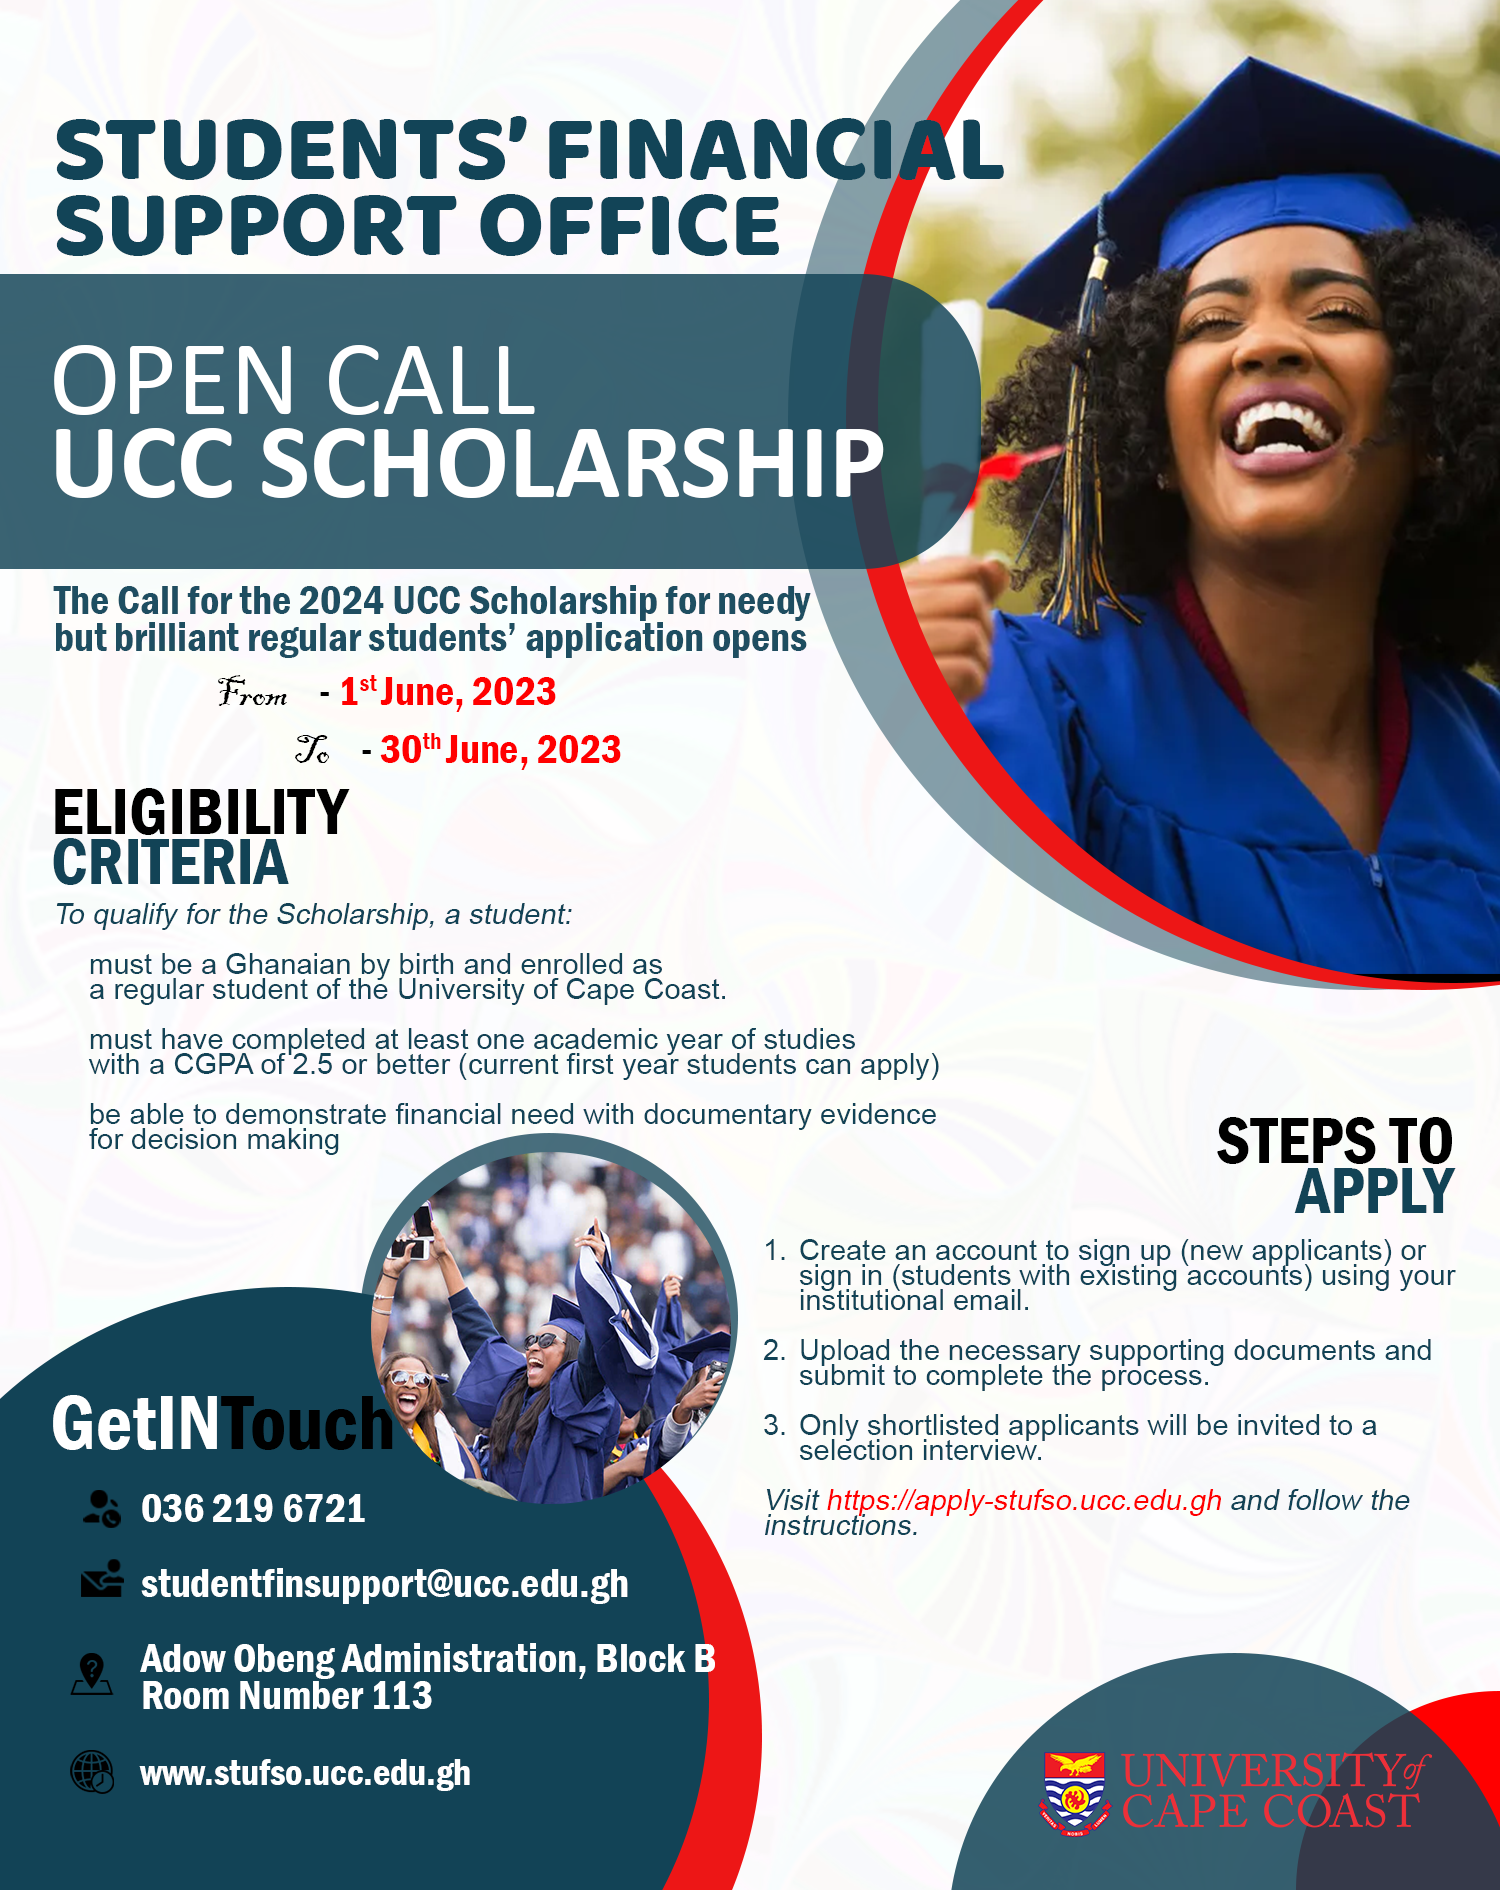 OPEN CALL FOR THE 2024 UCC SCHOLARSHIP APPLICATION Student's